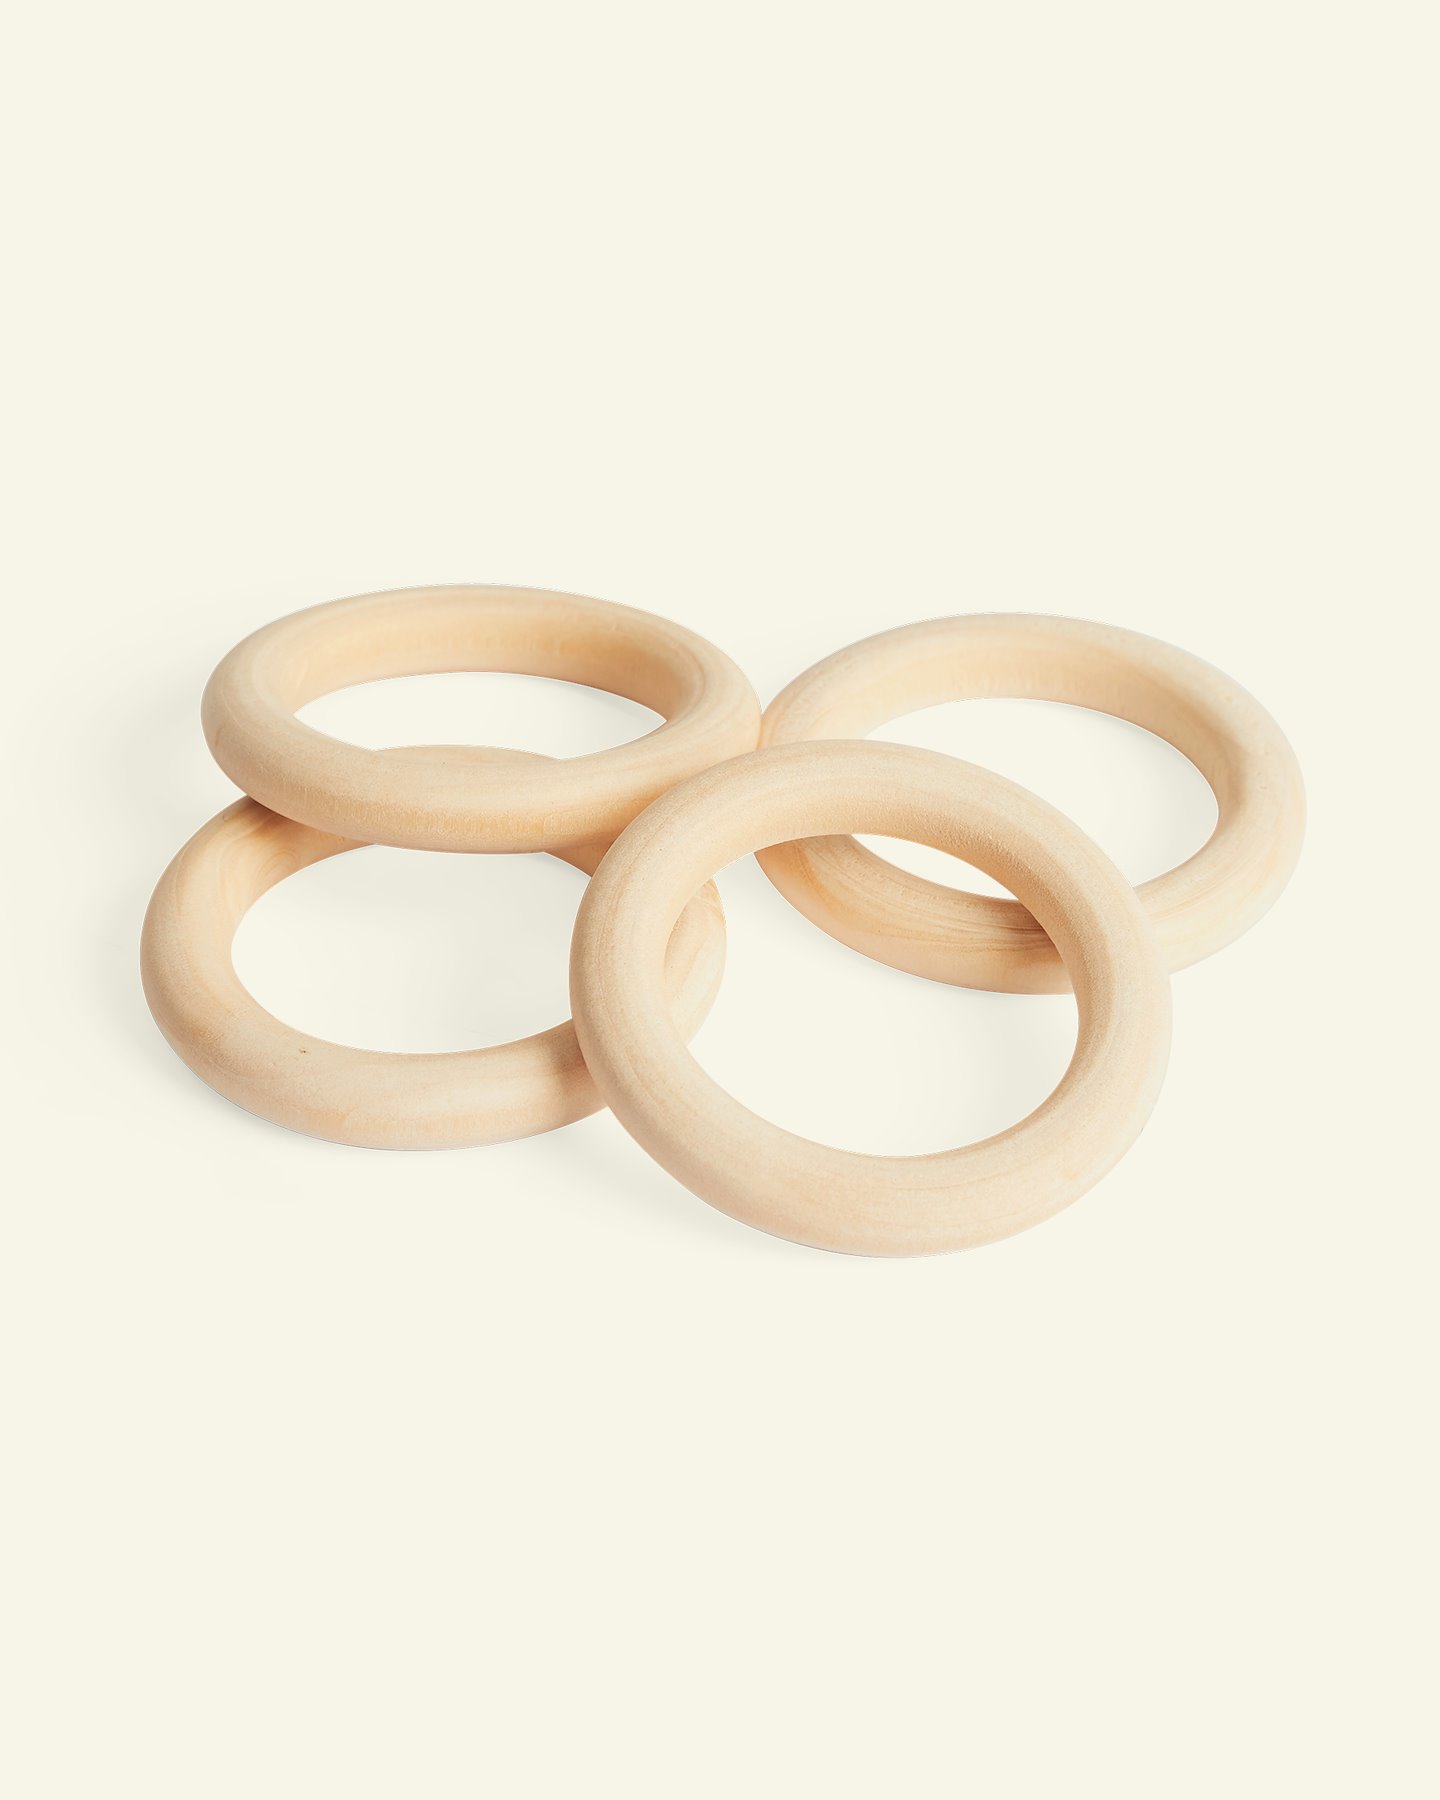 Wooden ring for decoration 40/57mm 4pcs 43164_pack